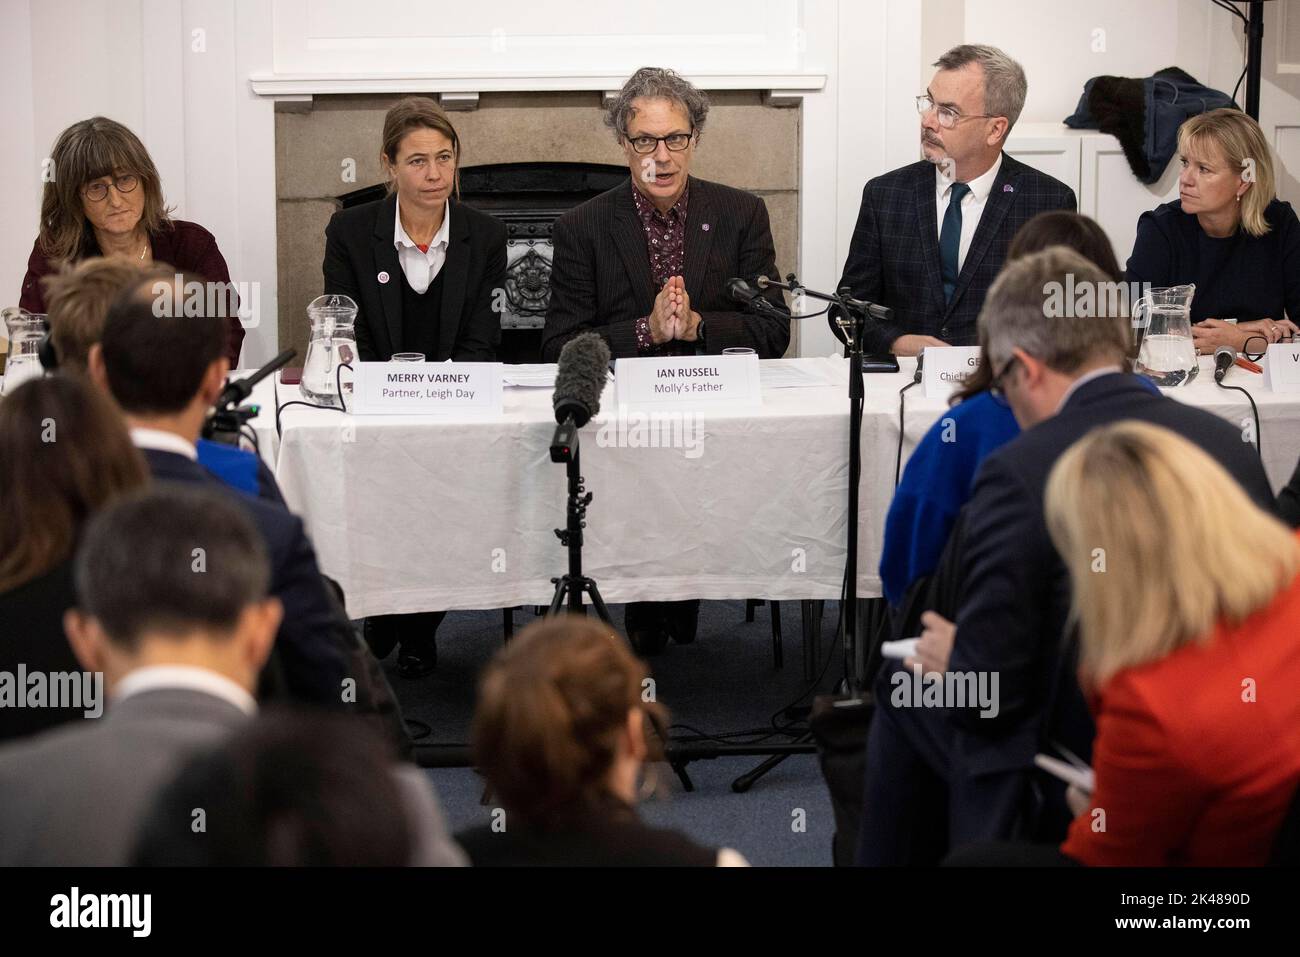 London, UK. 30th Sep, 2022. PHOTO:JEFF GILBERT 30th September 2022 Barnet, North London, UK Ian Russell (Molly's father), speaking at a press conference on the final day of the Molly Russell inquest at North London Coronoer’s Court. Credit: Jeff Gilbert/Alamy Live News Stock Photo